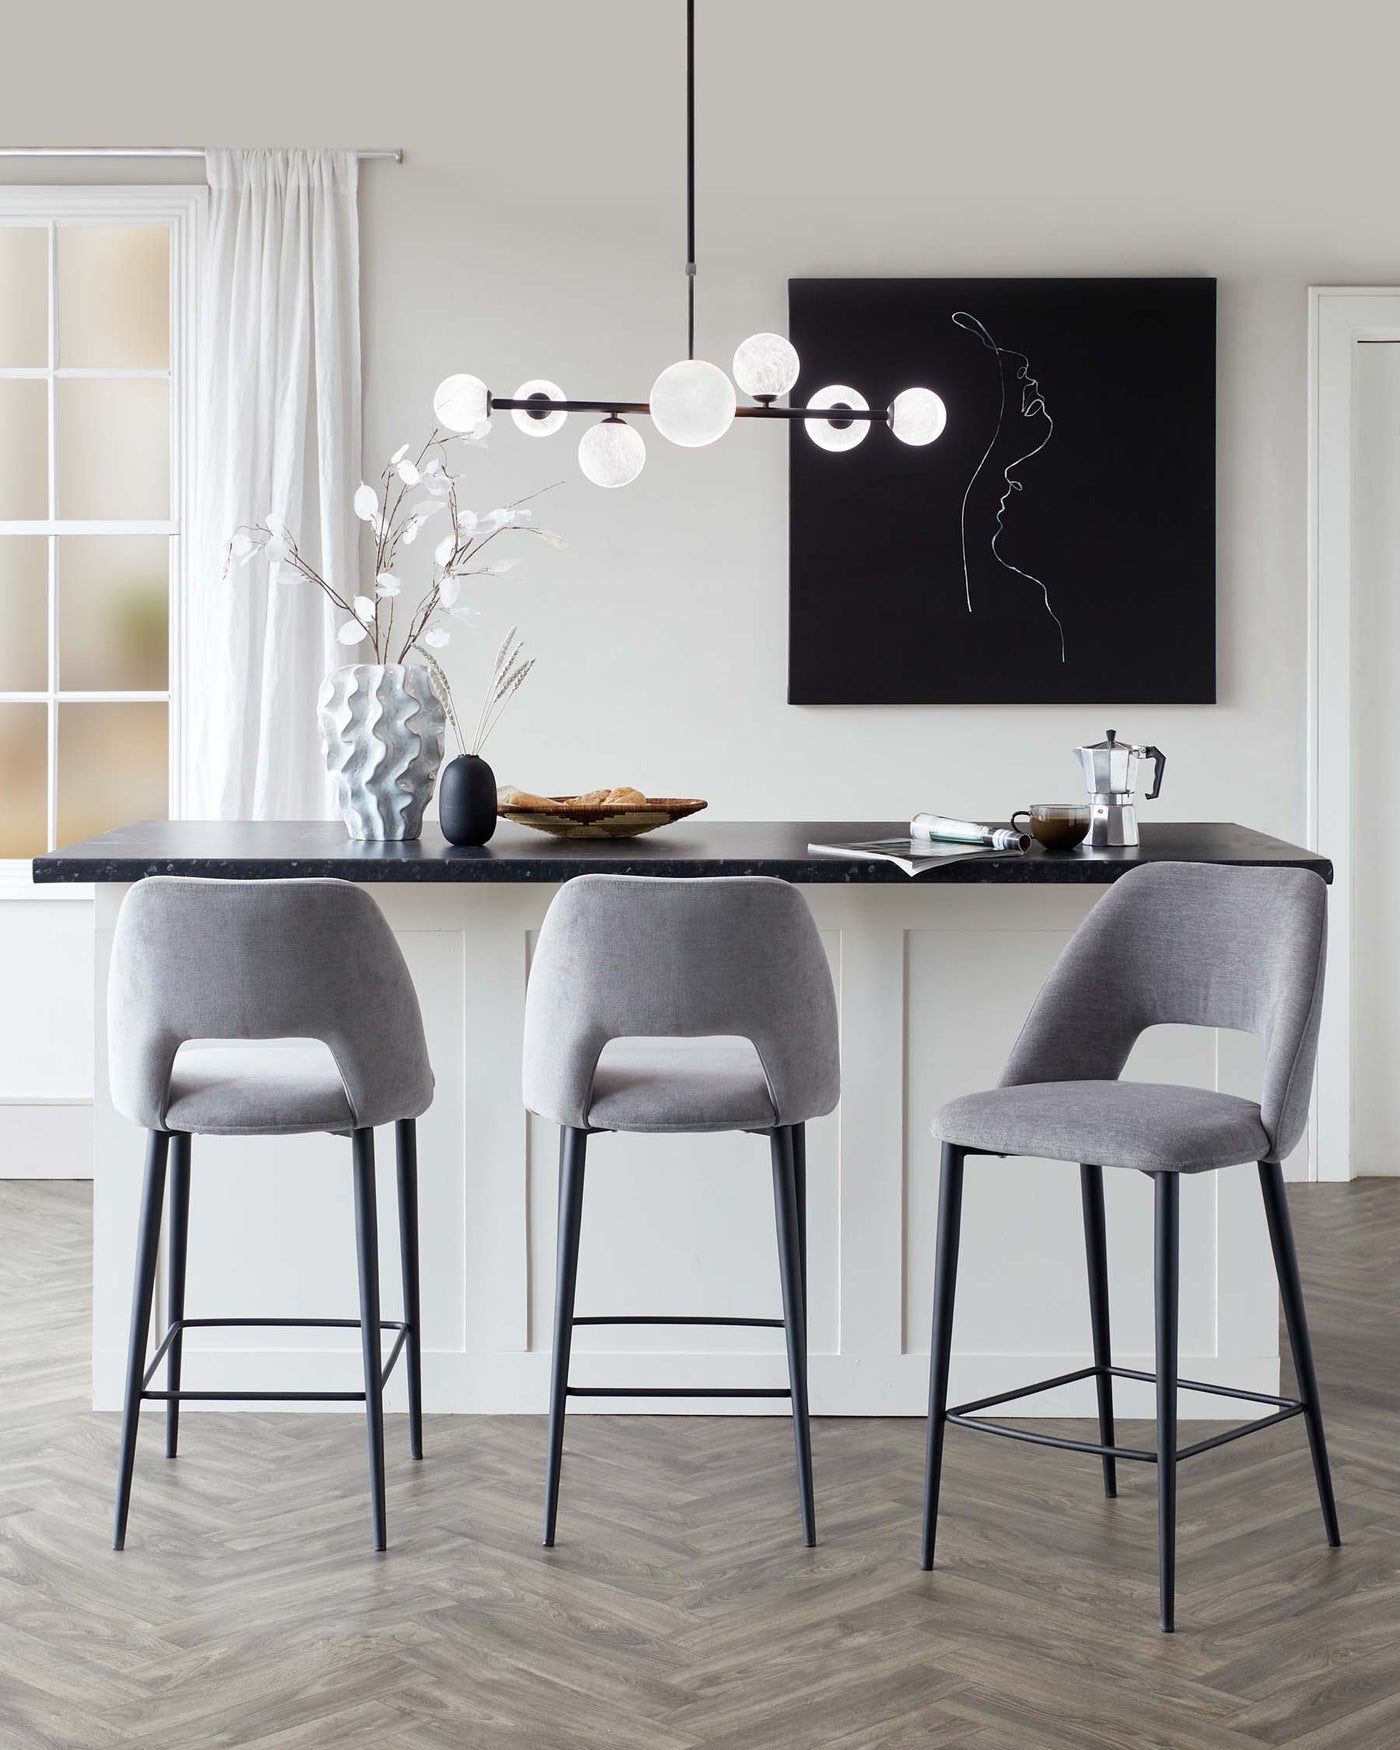 Modern minimalist kitchen with three contemporary bar stools featuring grey upholstery and slender black metal legs, paired with a sleek black countertop.